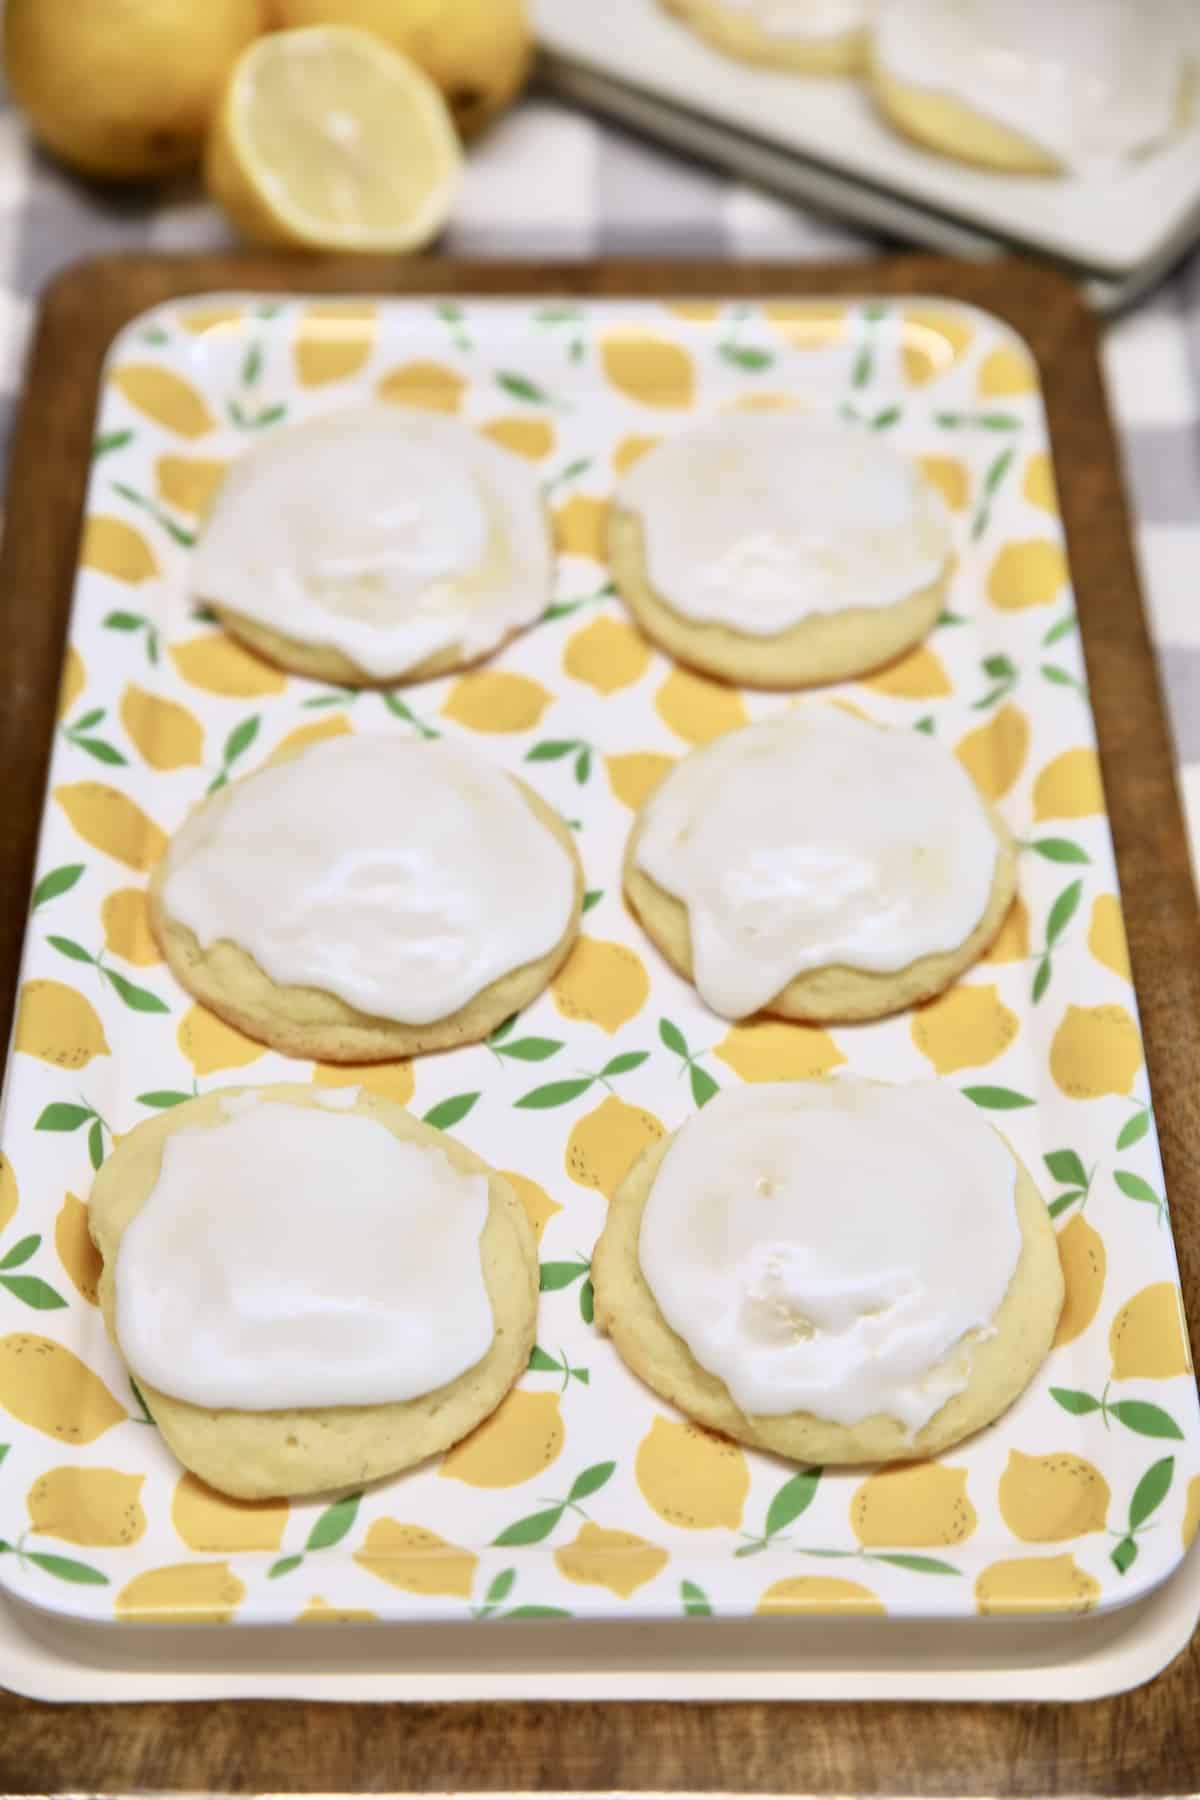 Lemon butter cookies with icing on a platter.